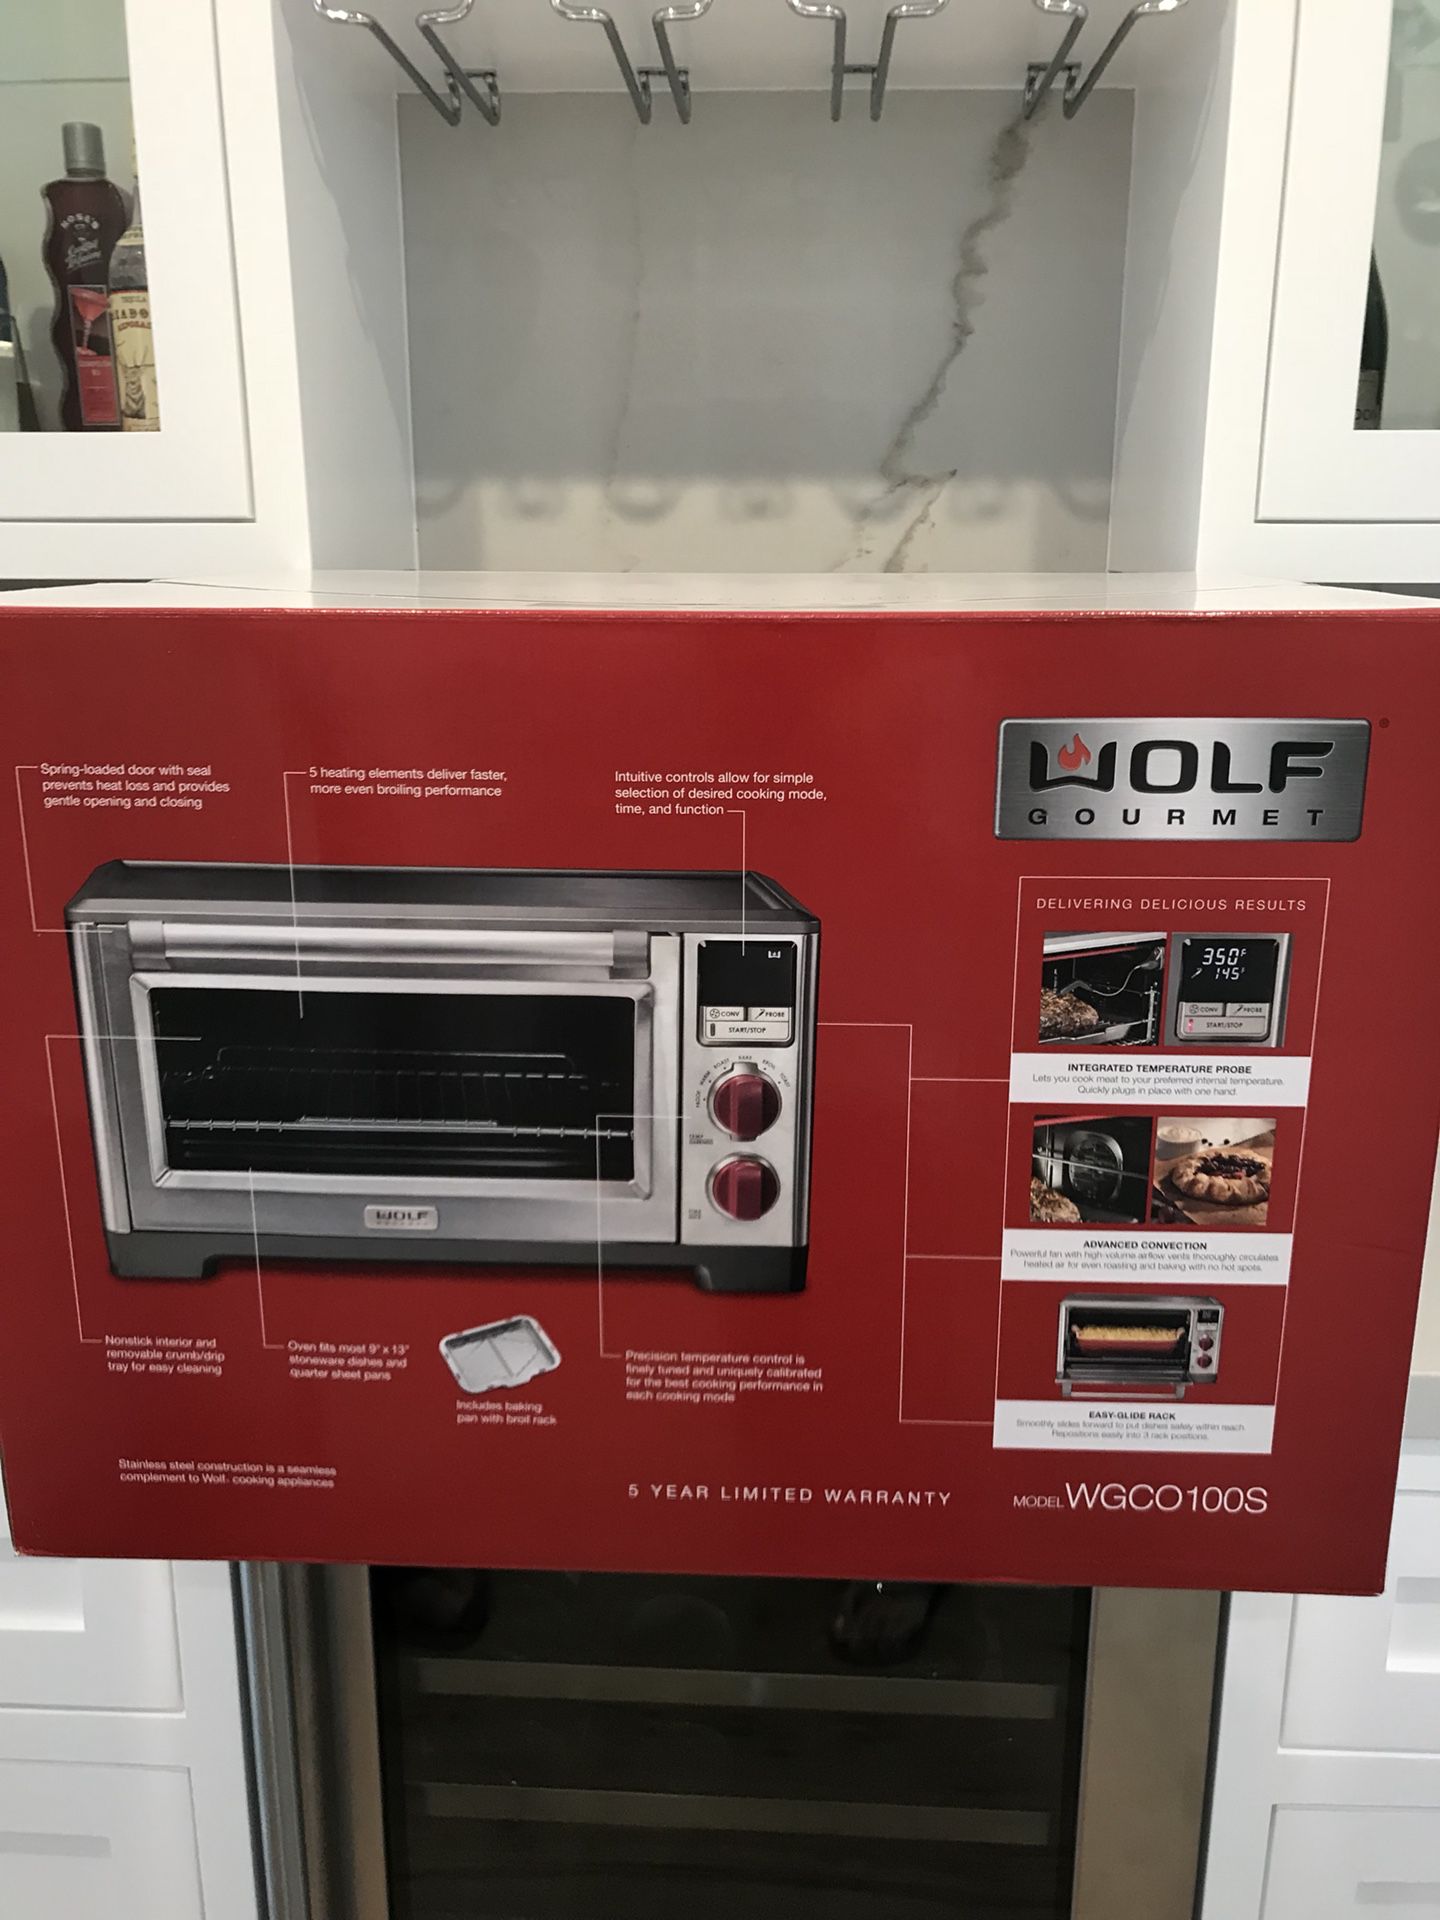 WOLF Countertop Oven for Sale in Los Angeles, CA - OfferUp